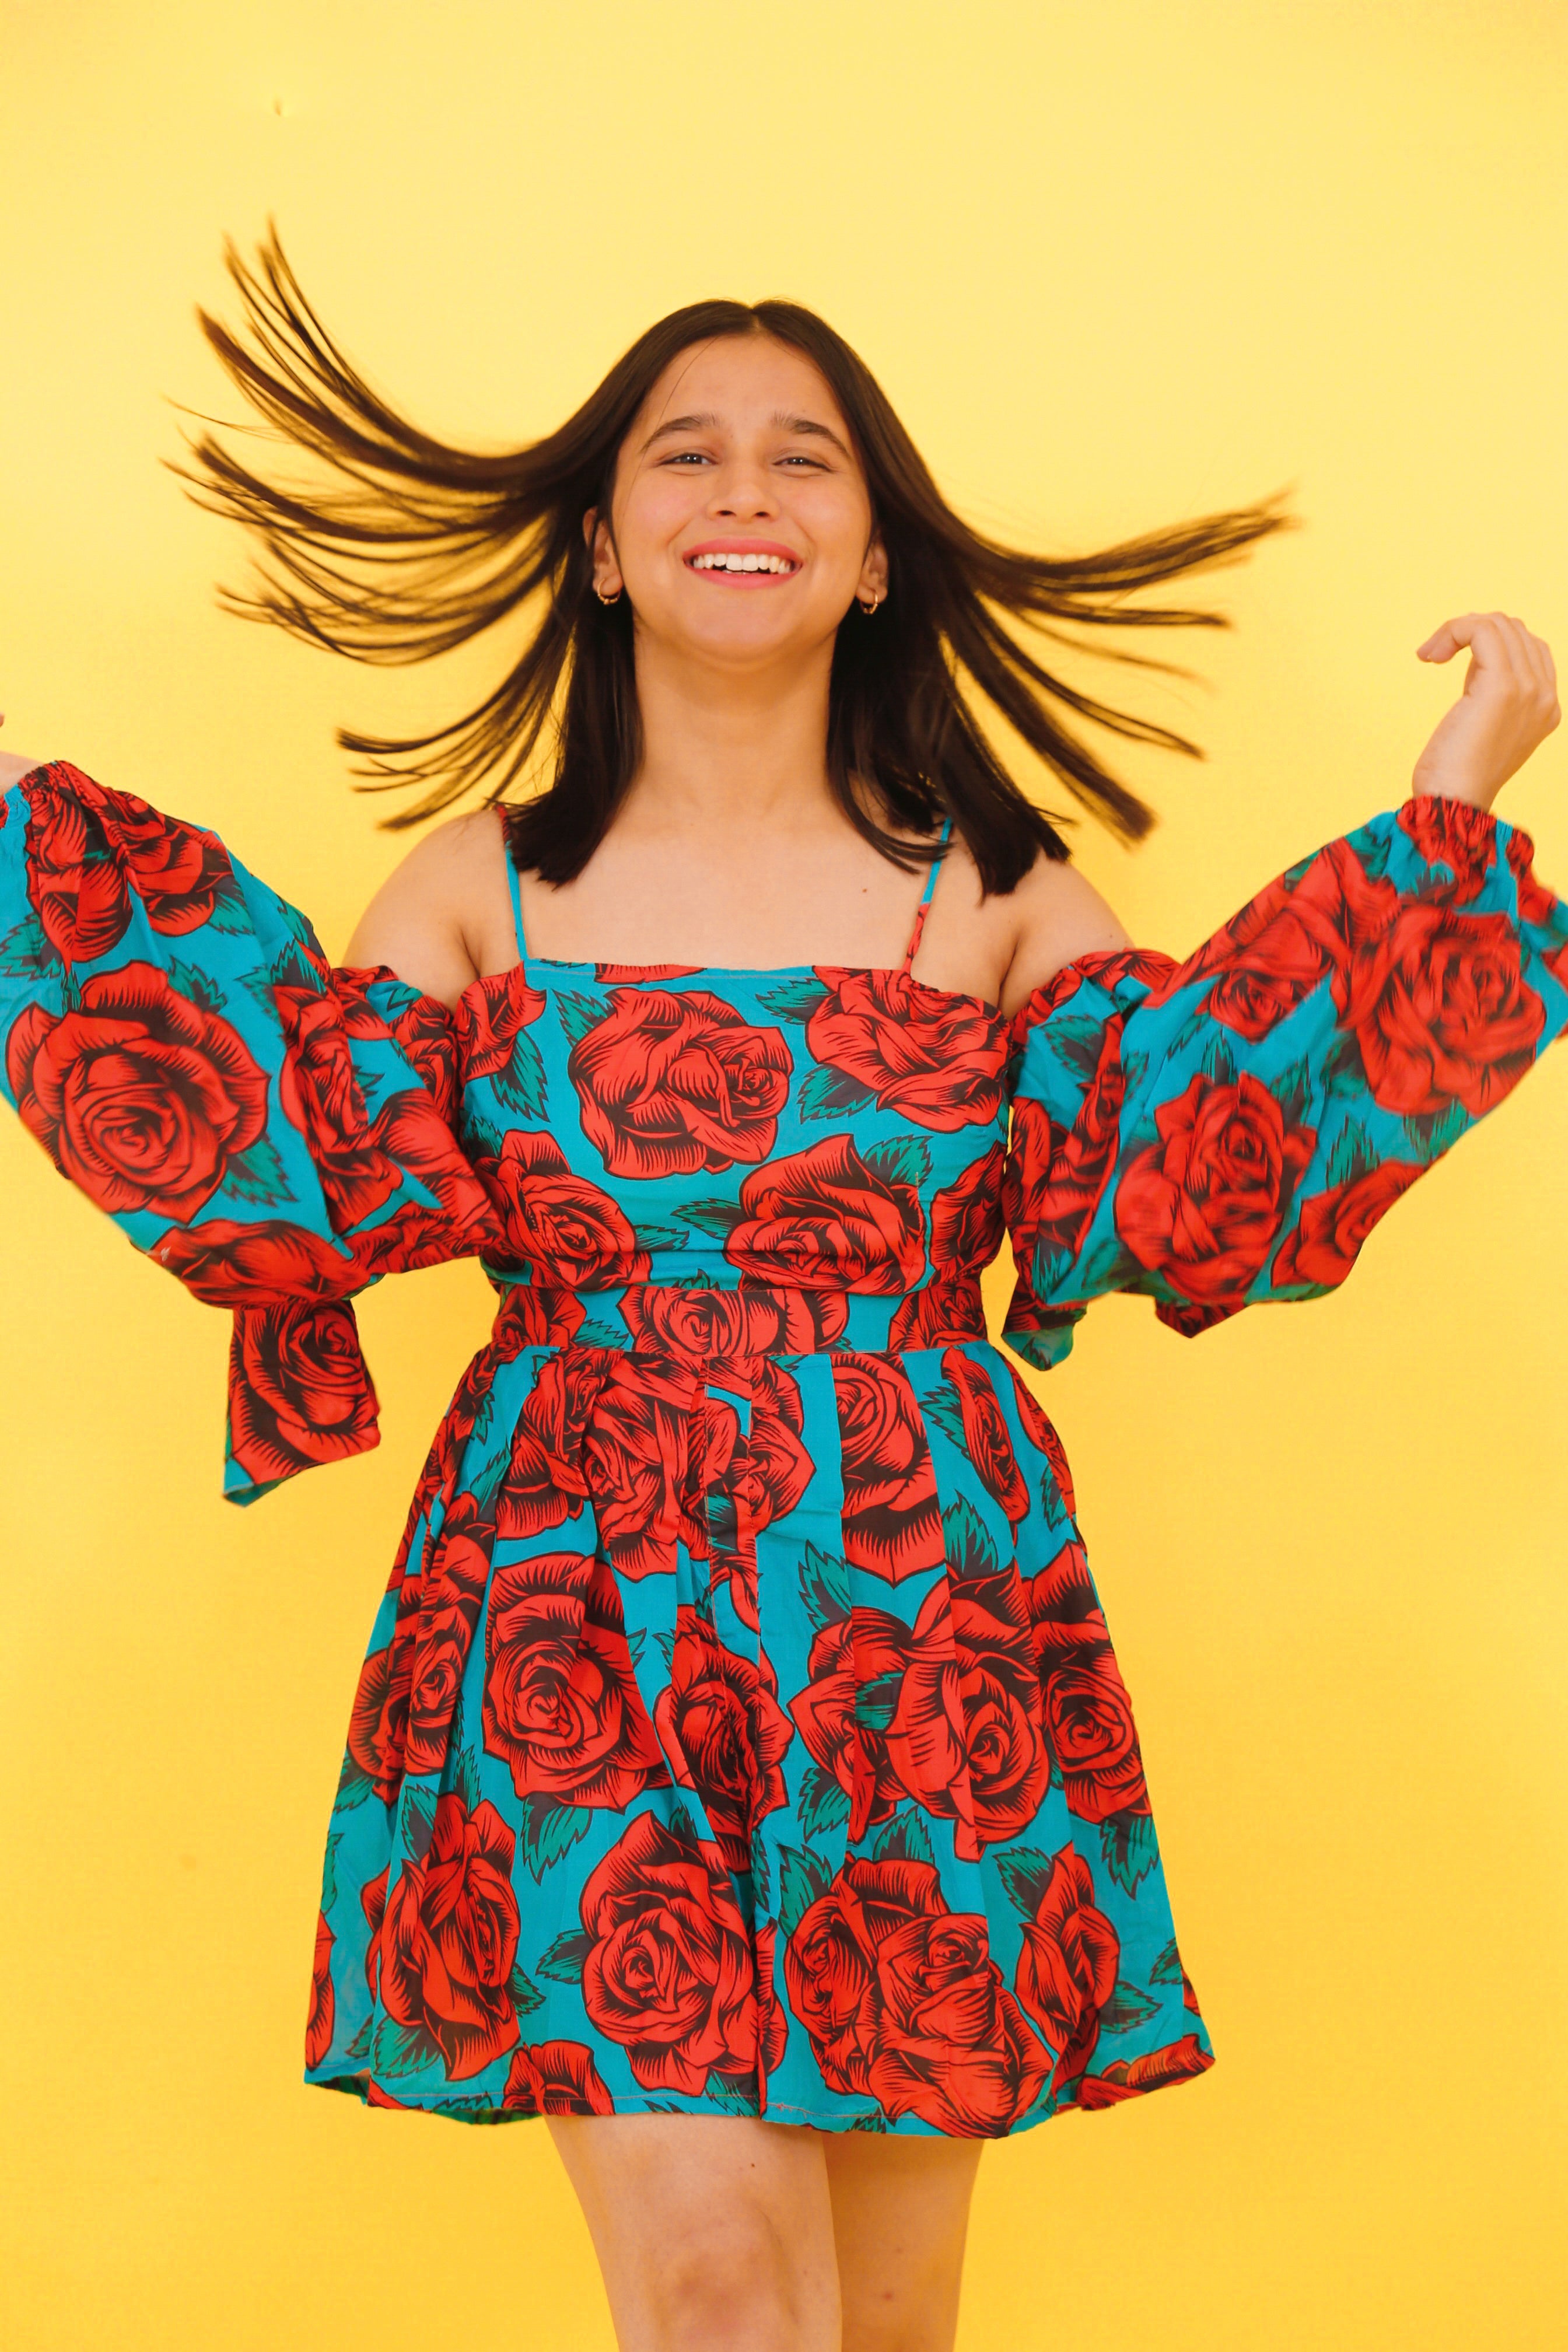 Red Rose Print Balloon Tie-Up Sleeve Dress